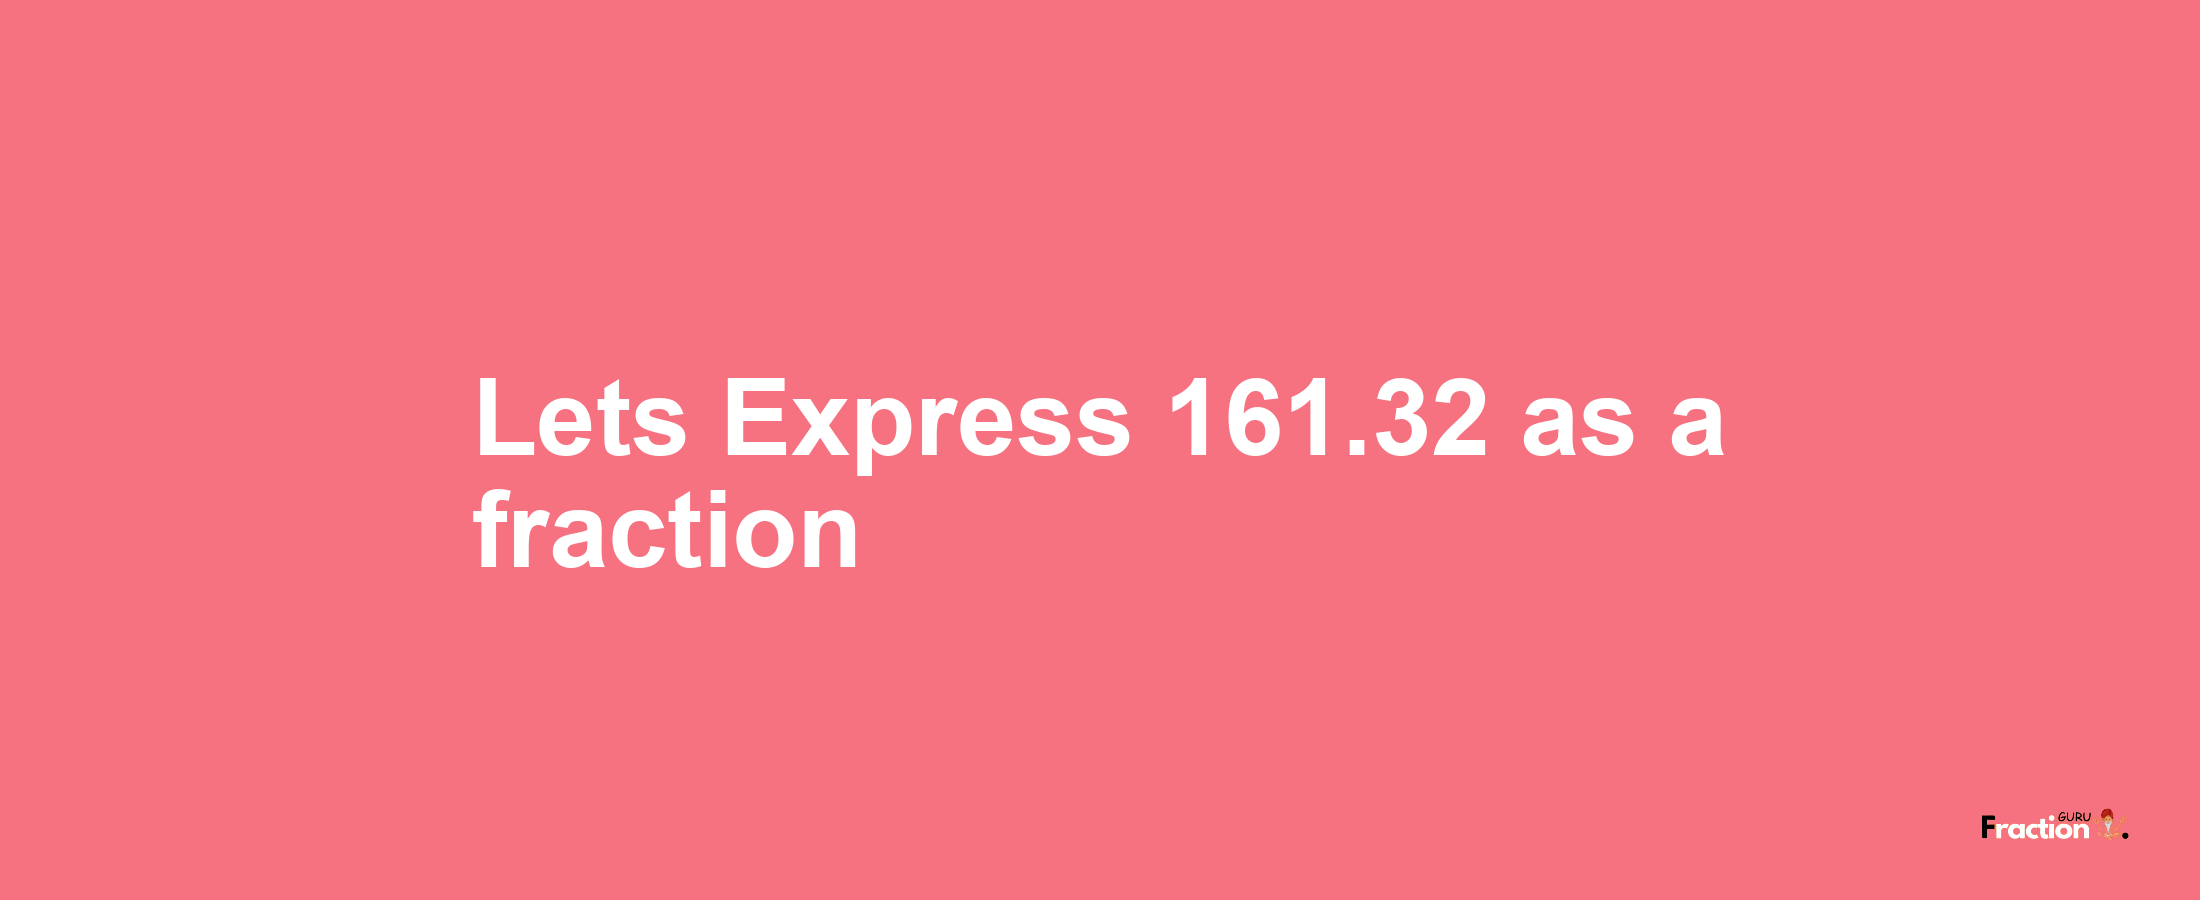 Lets Express 161.32 as afraction